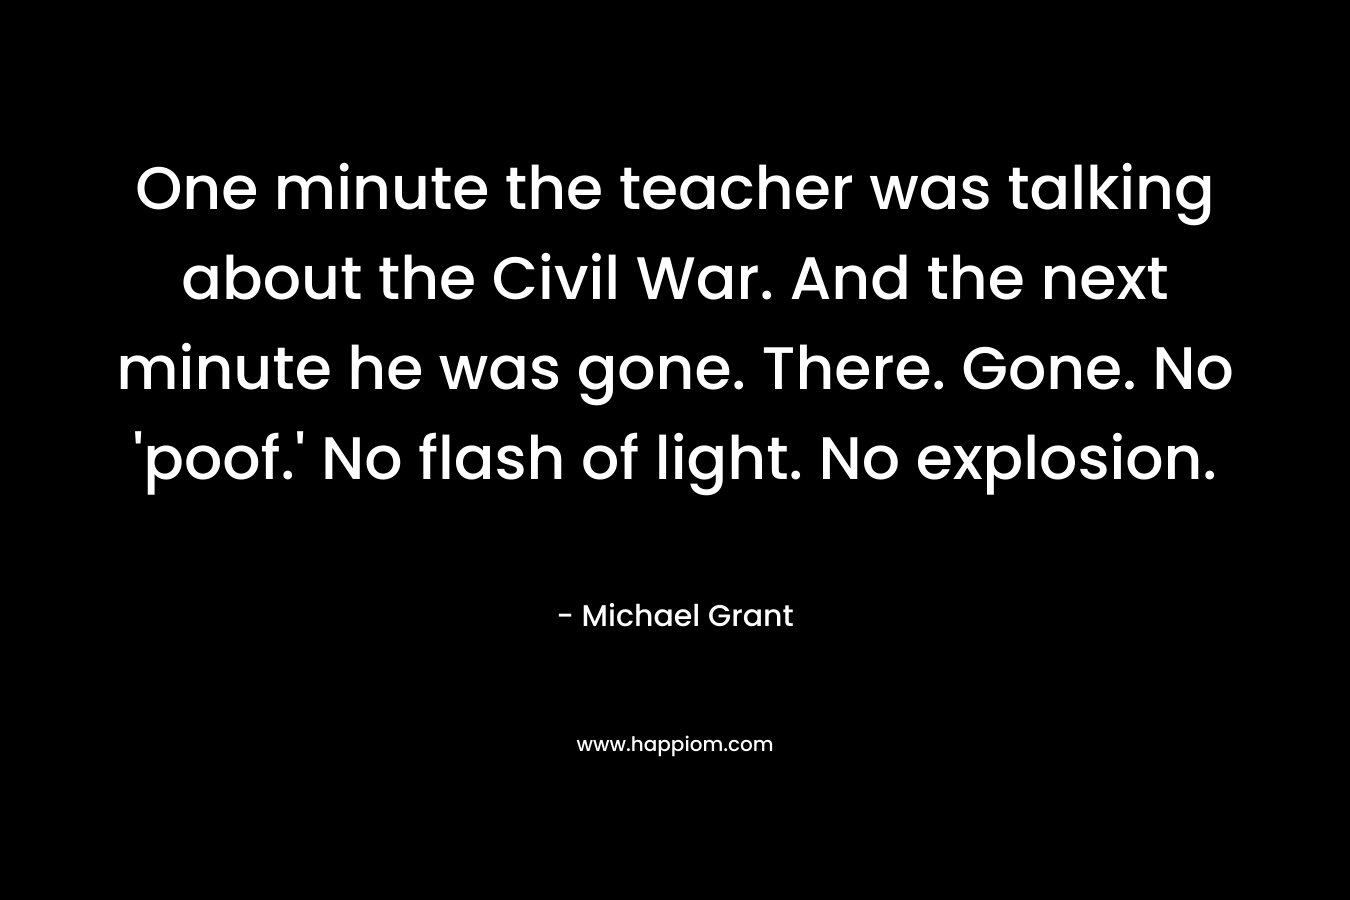 One minute the teacher was talking about the Civil War. And the next minute he was gone. There. Gone. No 'poof.' No flash of light. No explosion.